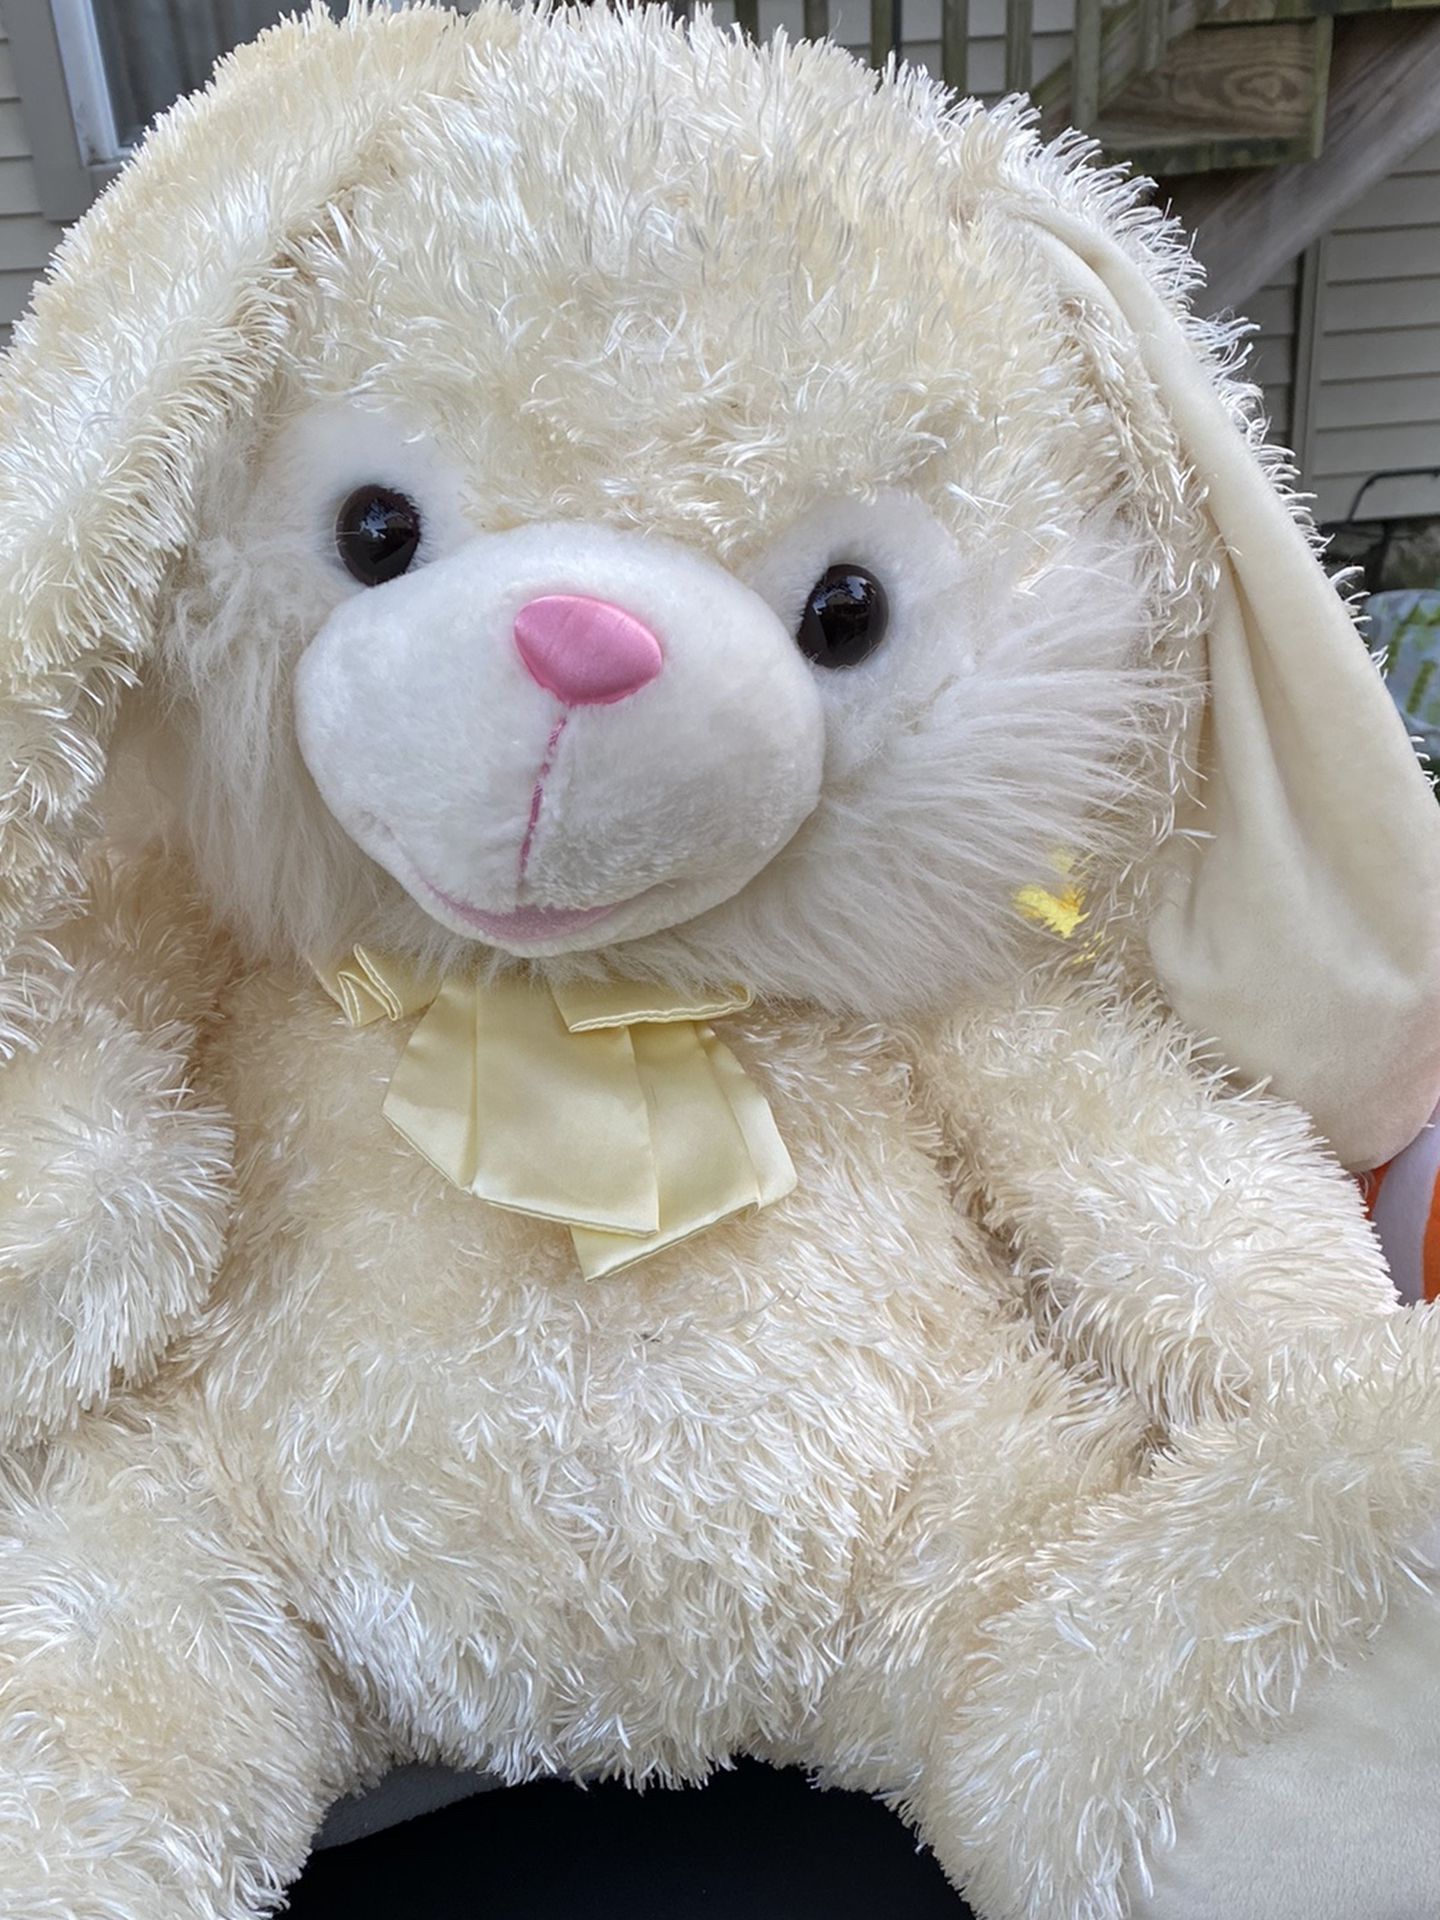 Plush Easter Bunny - Very Large